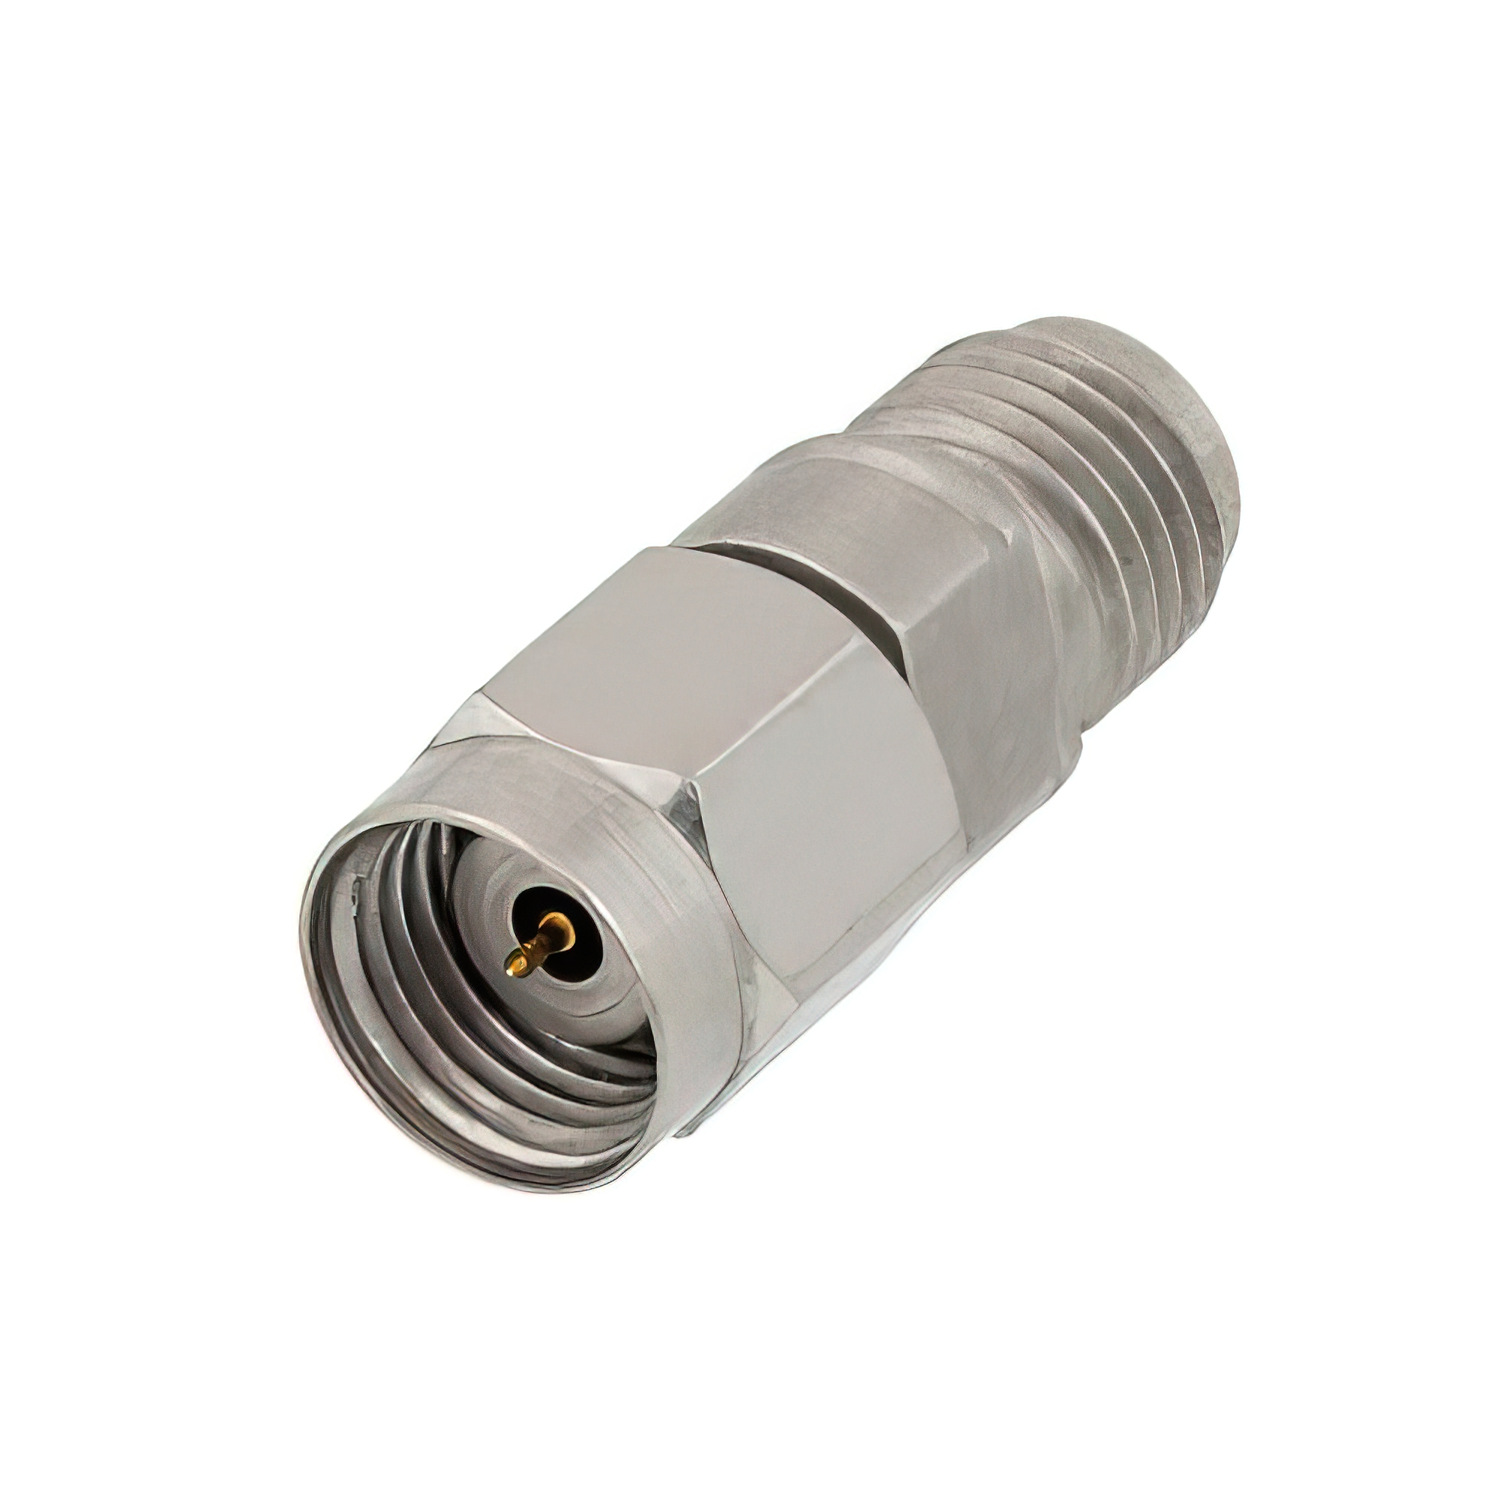 2.4mm Female to 1.85mm Female Adapter1